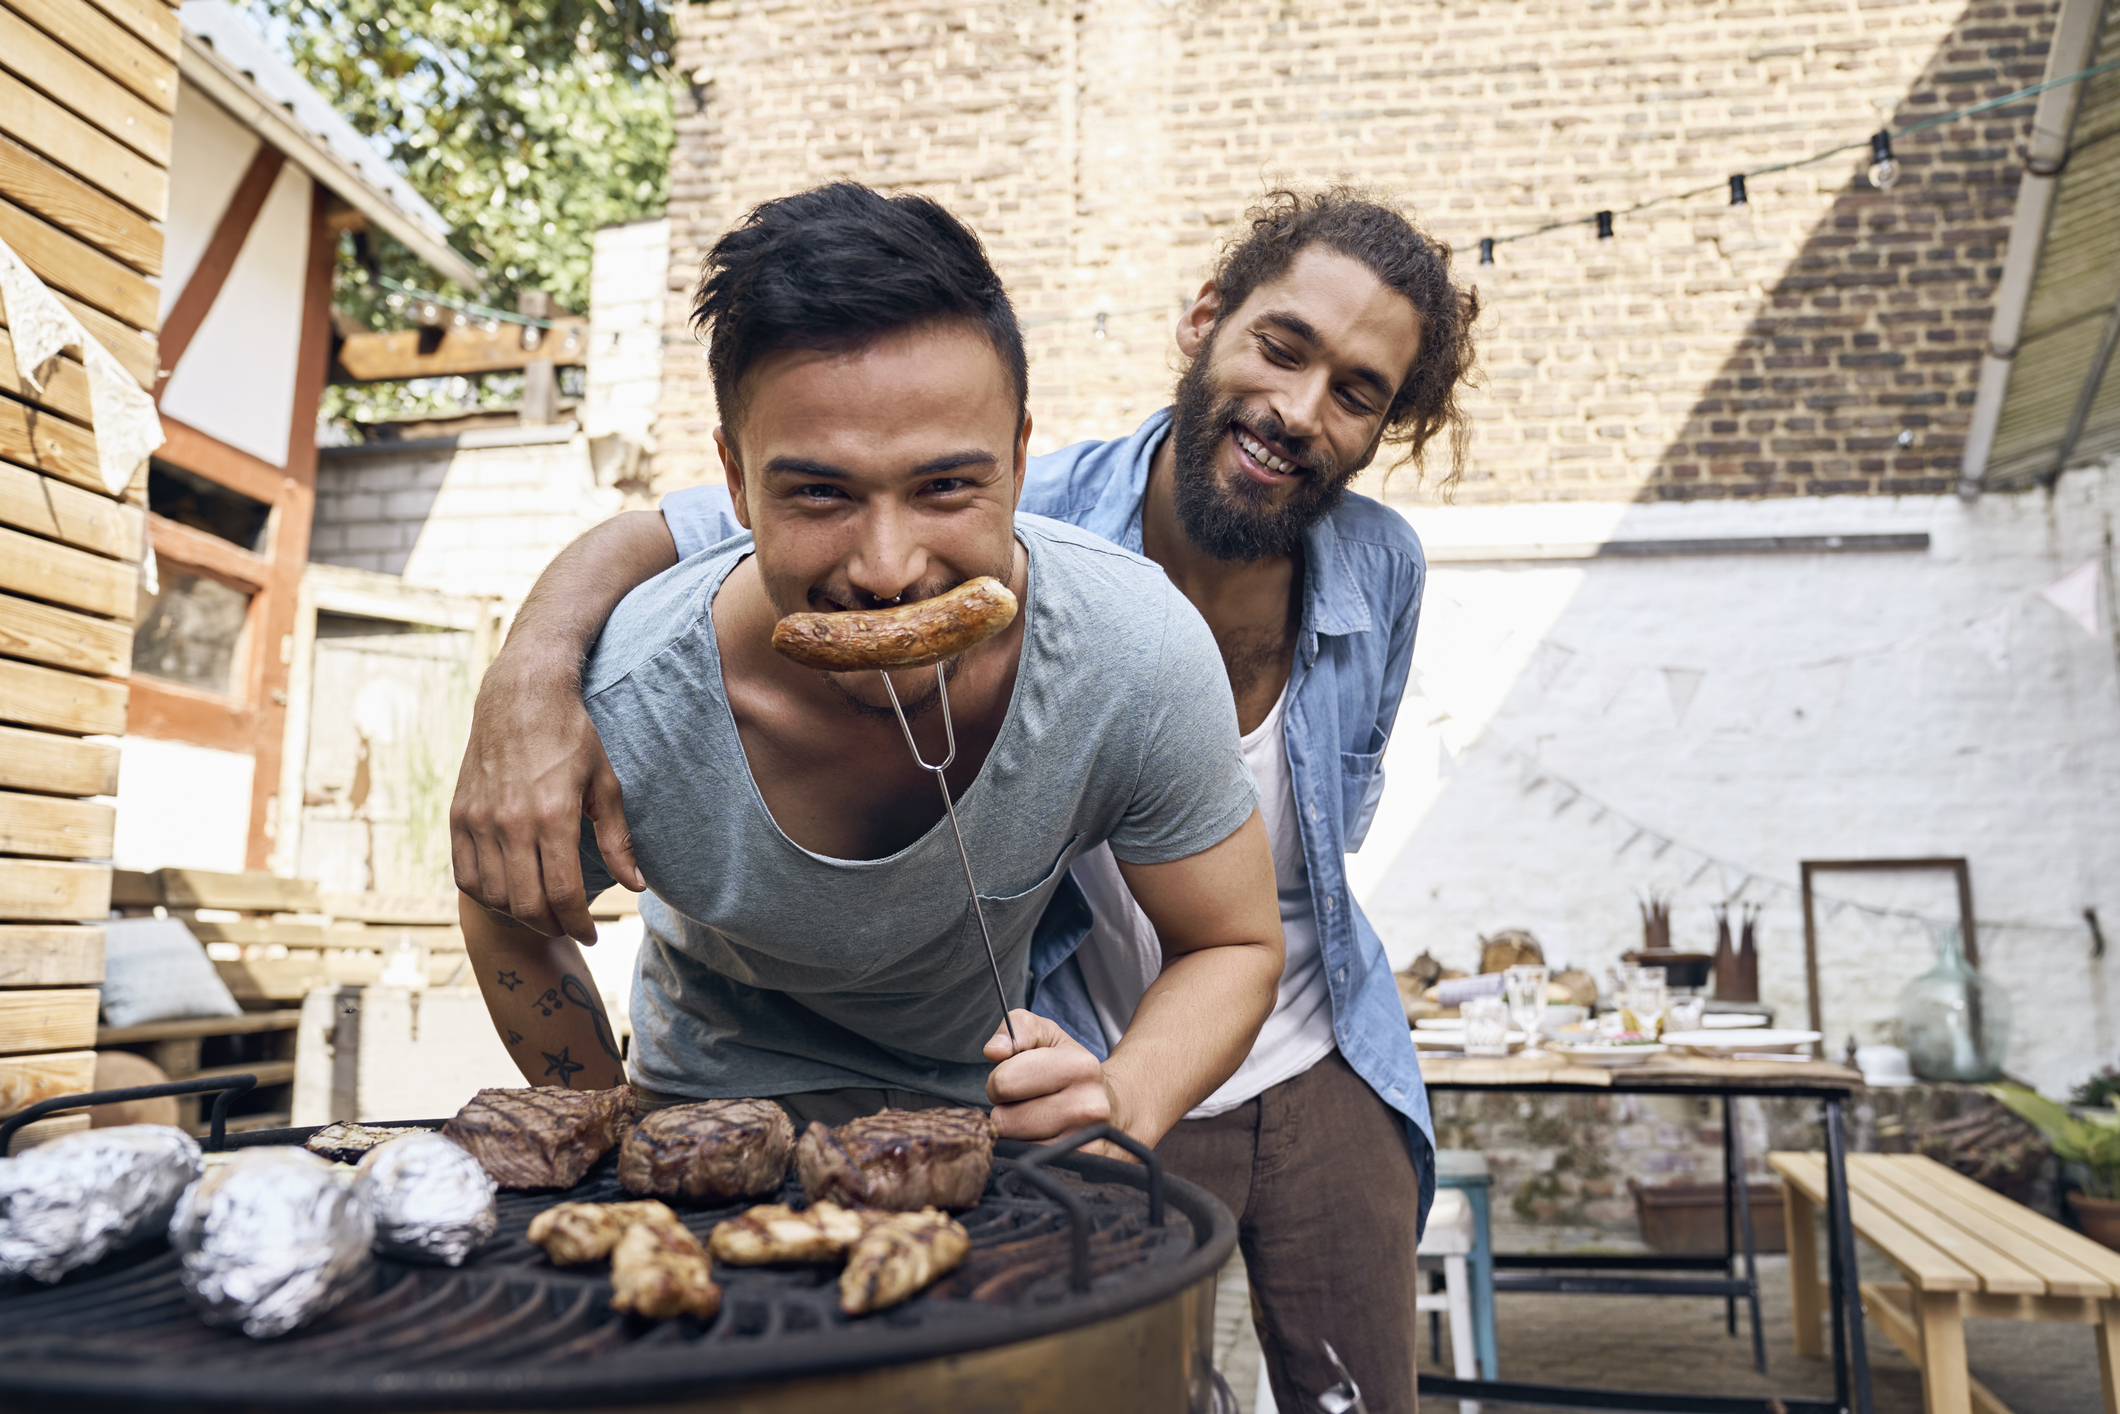 Two men enjoying a barbecue, one biting into a grilled sausage, smiling and bonding in a casual outdoor setting